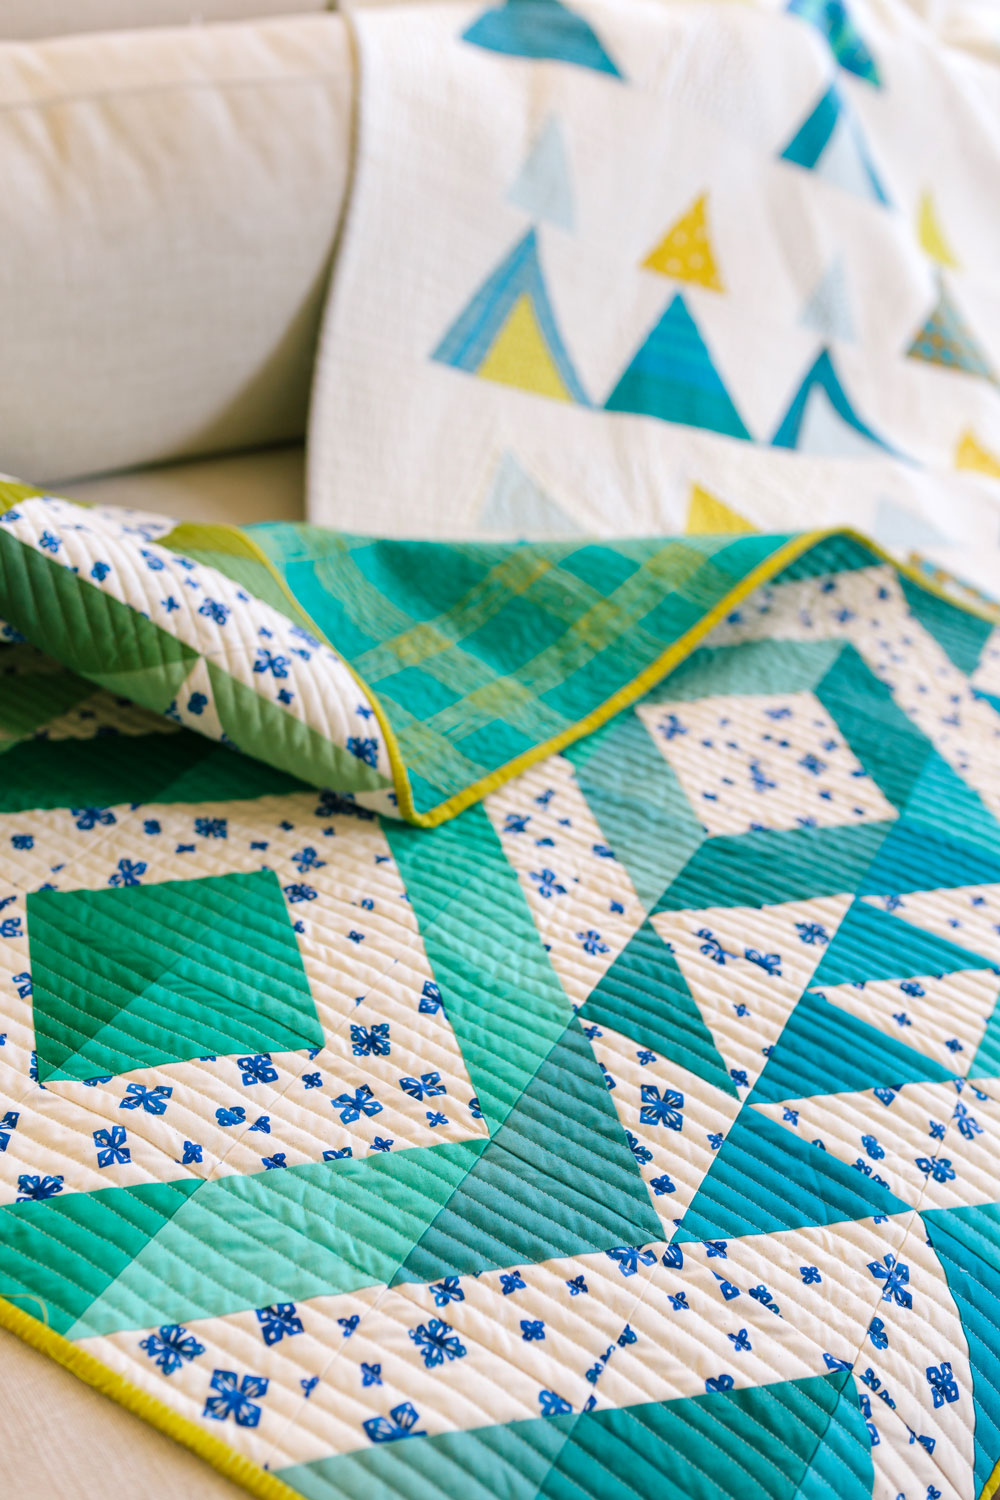 Make a Triangle Jitters quilt with 8 fat quarters! This is a beginner-friendly half square triangle pattern. Discover how to achieve this ombré effect with the exact fabrics I used!